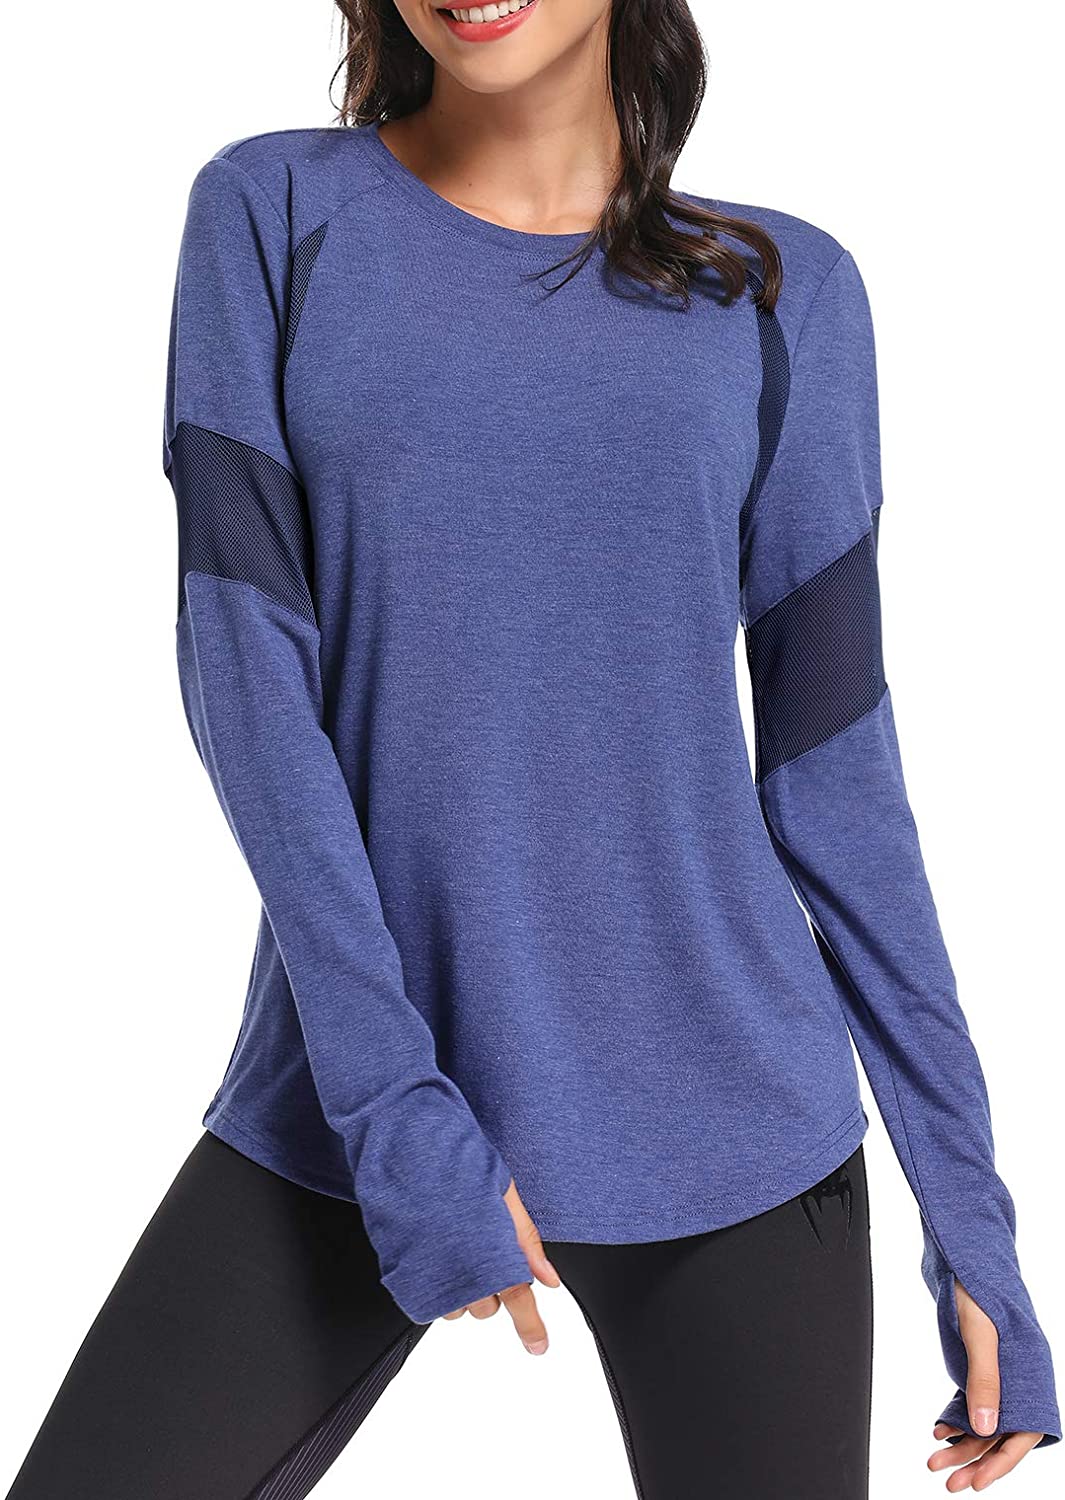  Extra Long Workout Shirts For Women